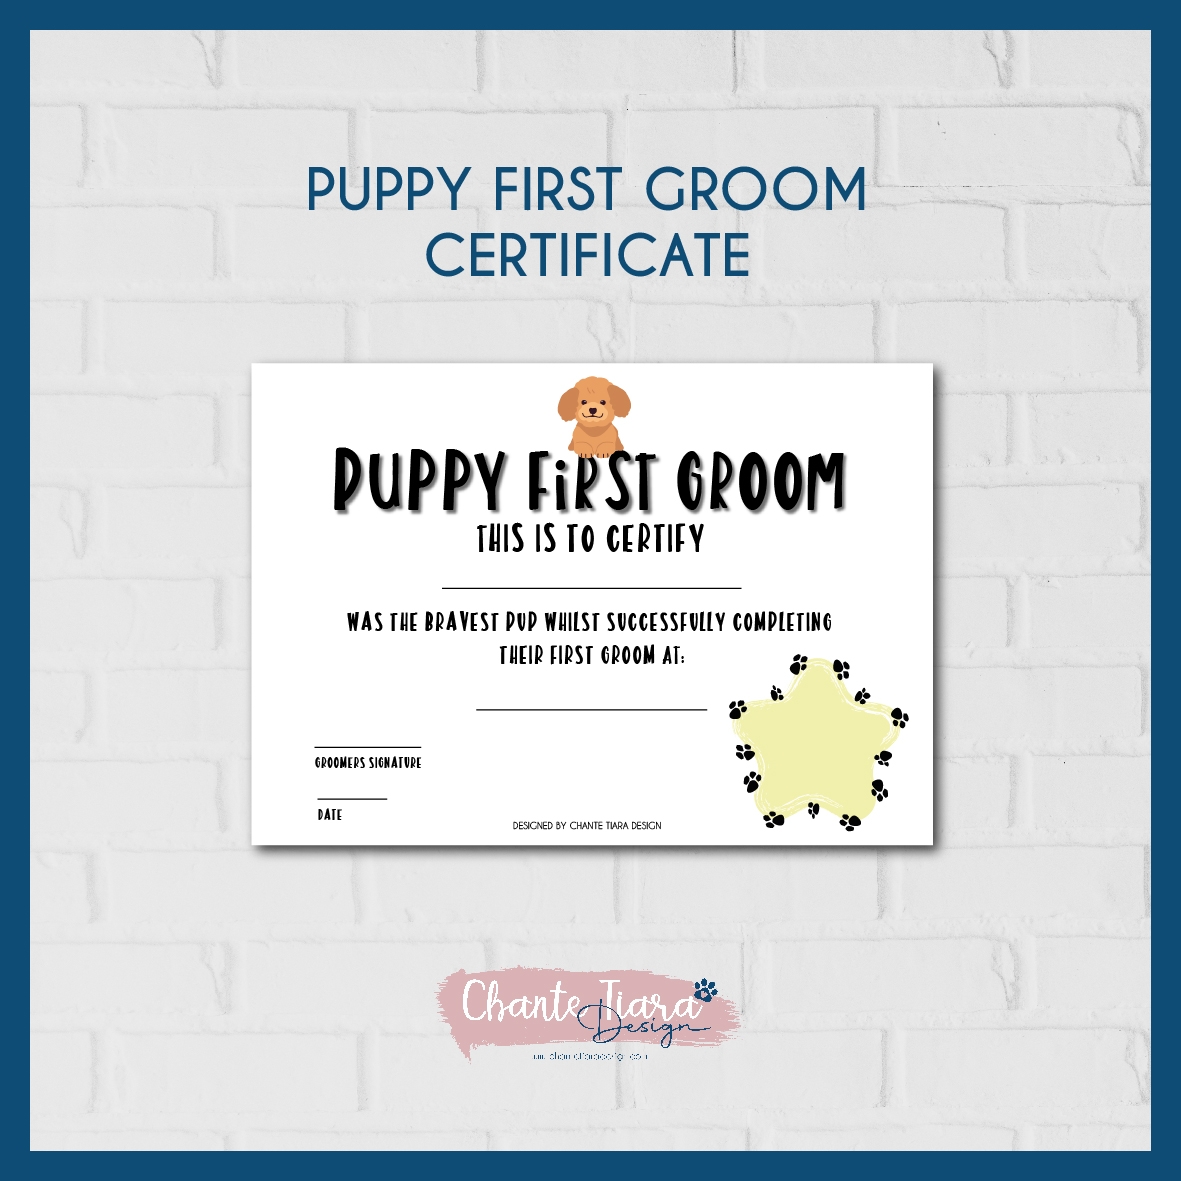 PUPPY FIRST GROOM CERTIFICATE